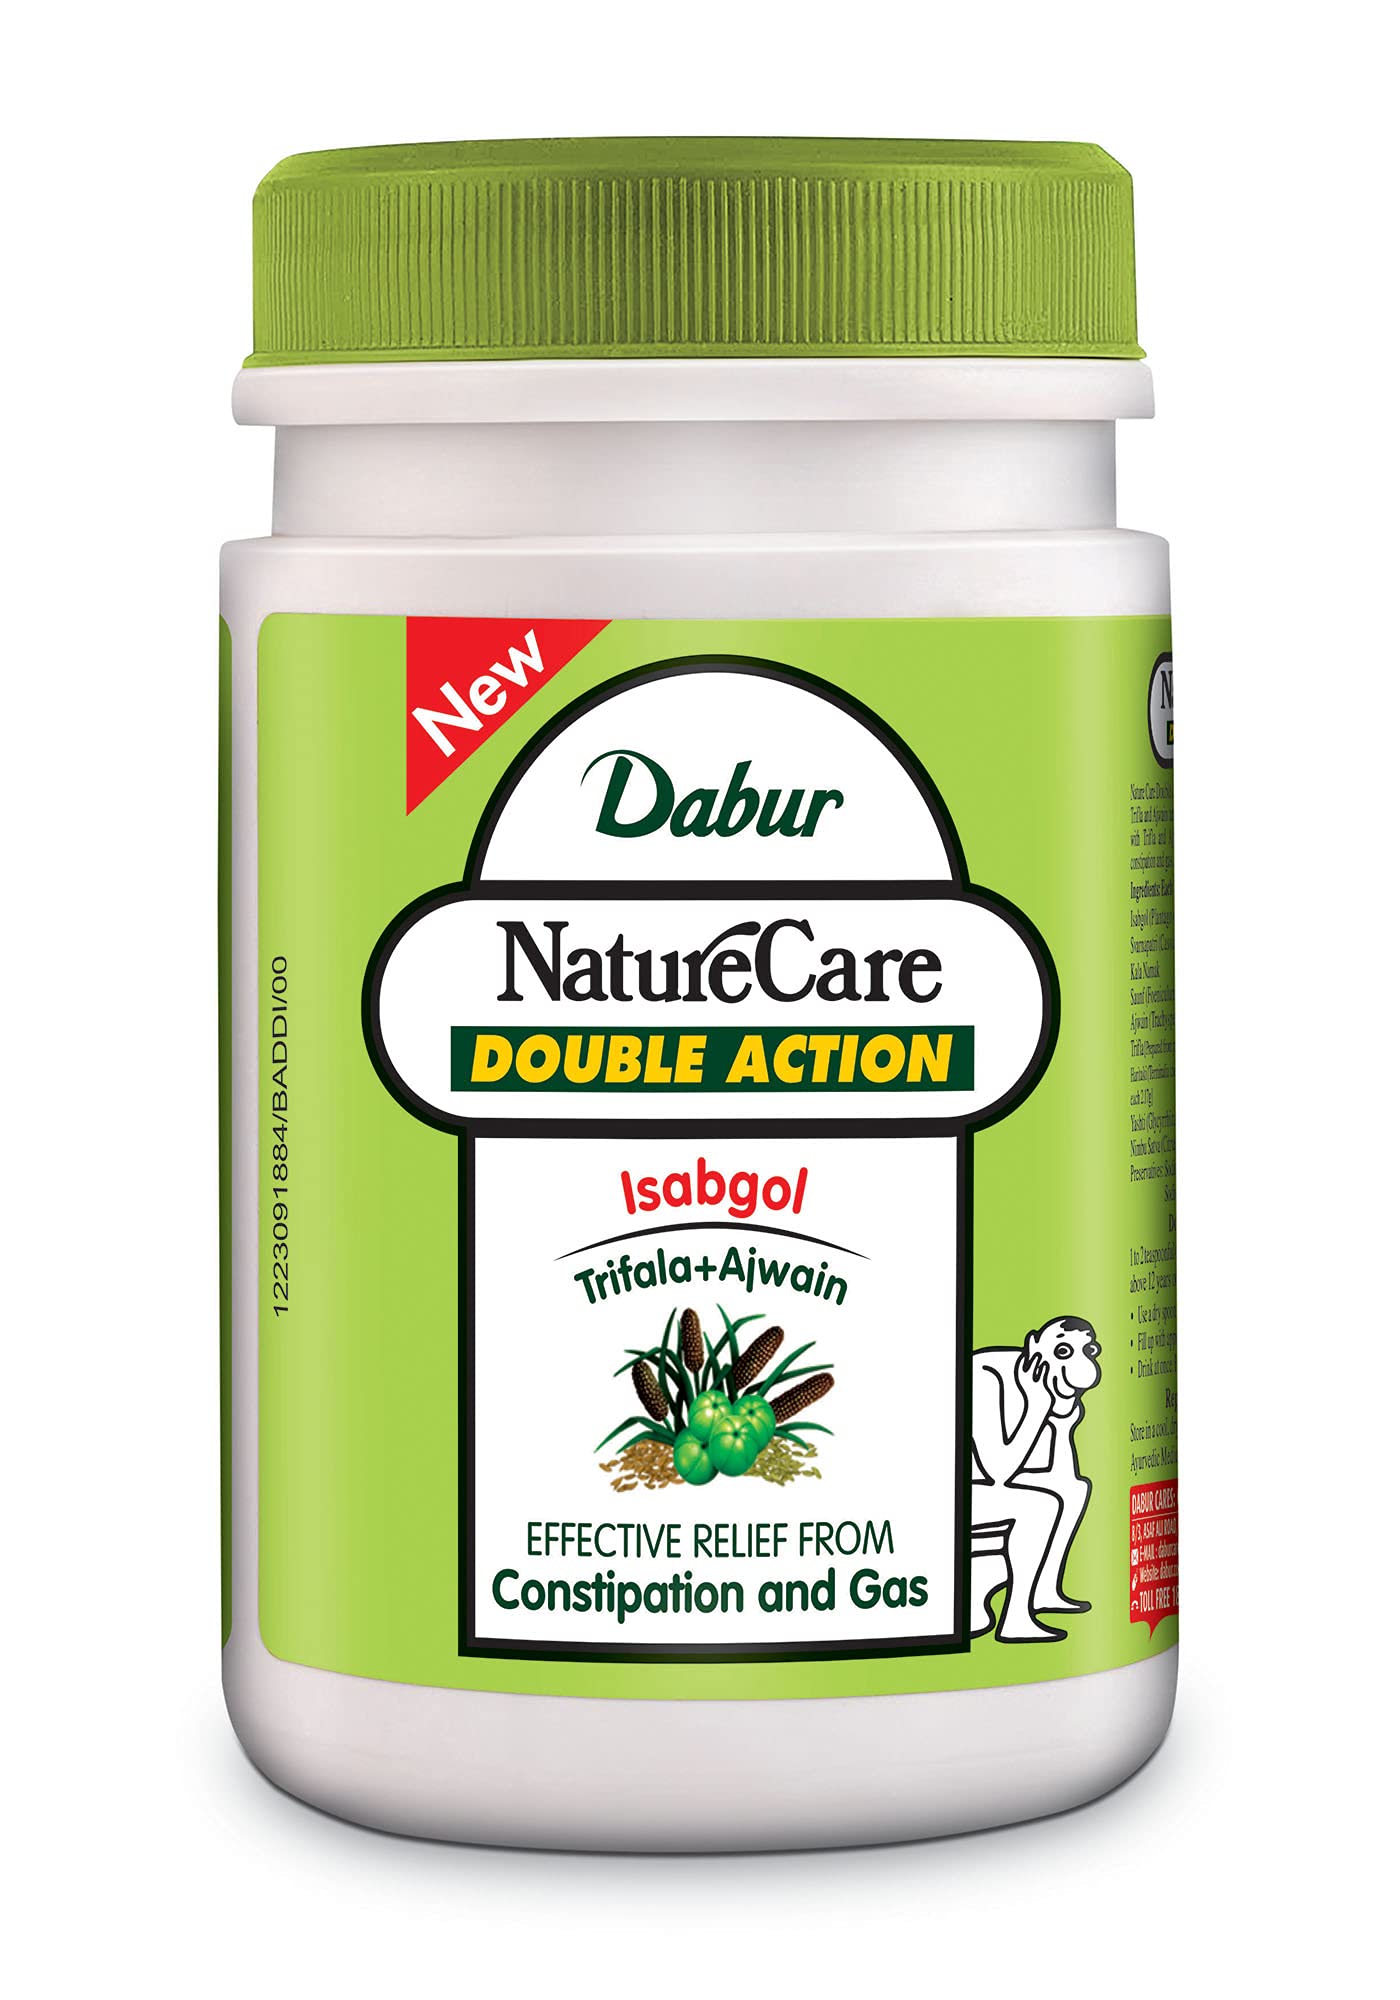 Buy Online Dabur NatureCare Double Action Isabgol (Trifala+Ajwain) Constipation Relief Powder - 100gm at best prize in India